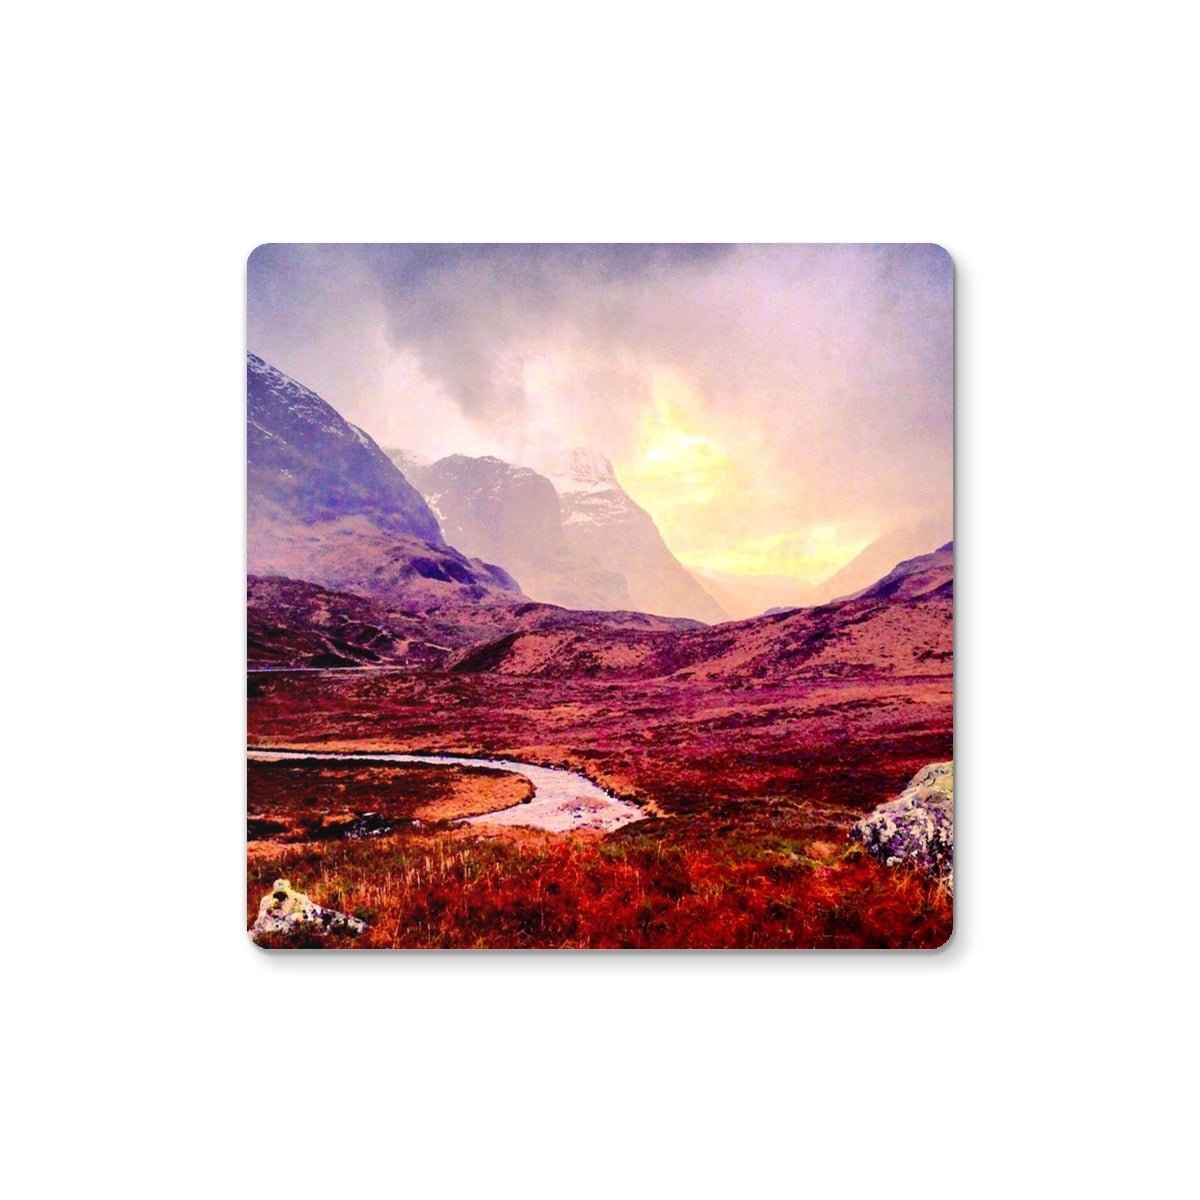 A Brooding Glencoe Art Gifts Coaster-Coasters-Glencoe Art Gallery-2 Coasters-Paintings, Prints, Homeware, Art Gifts From Scotland By Scottish Artist Kevin Hunter